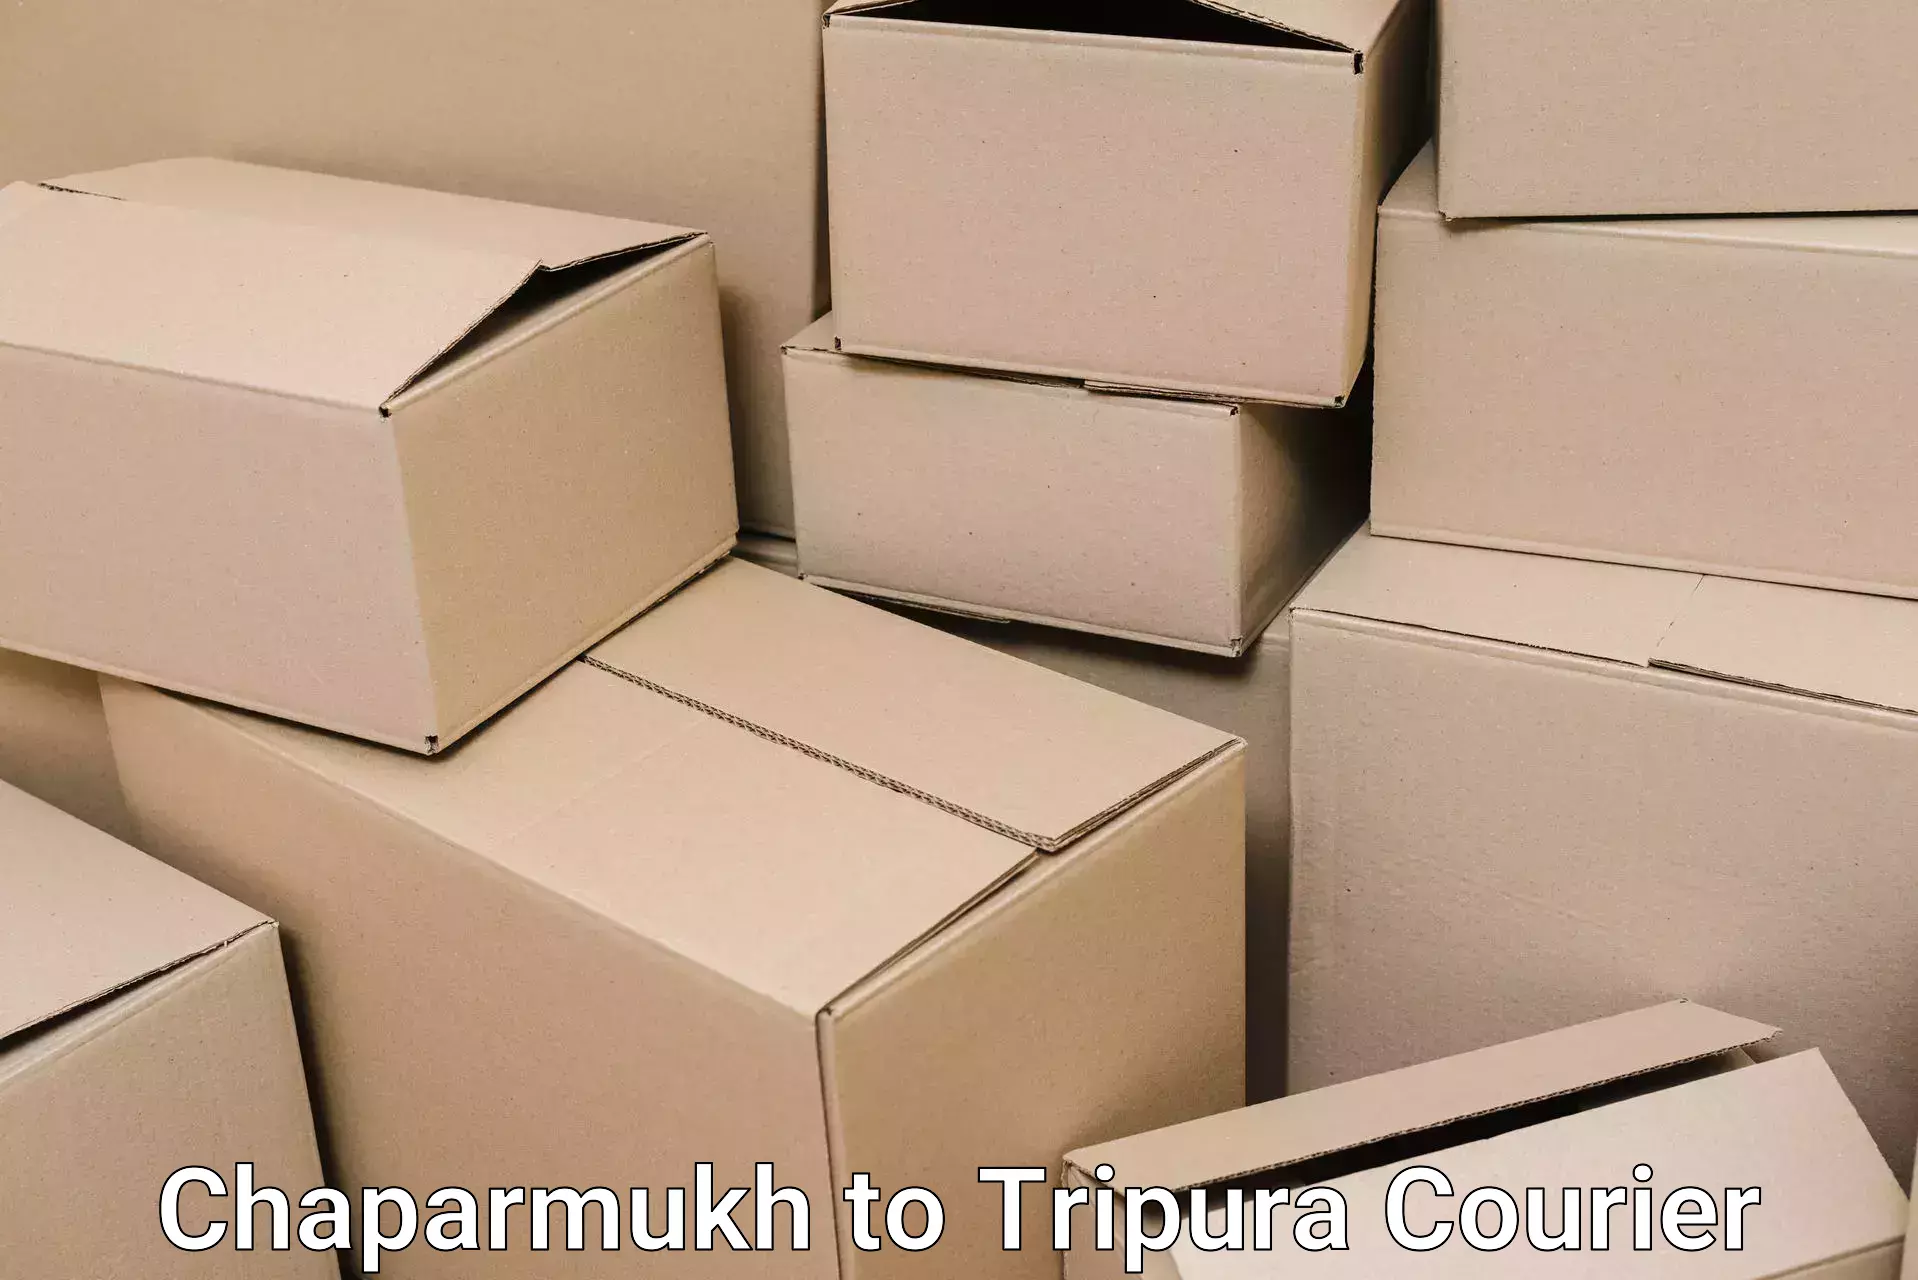 Tailored moving packages Chaparmukh to Udaipur Tripura